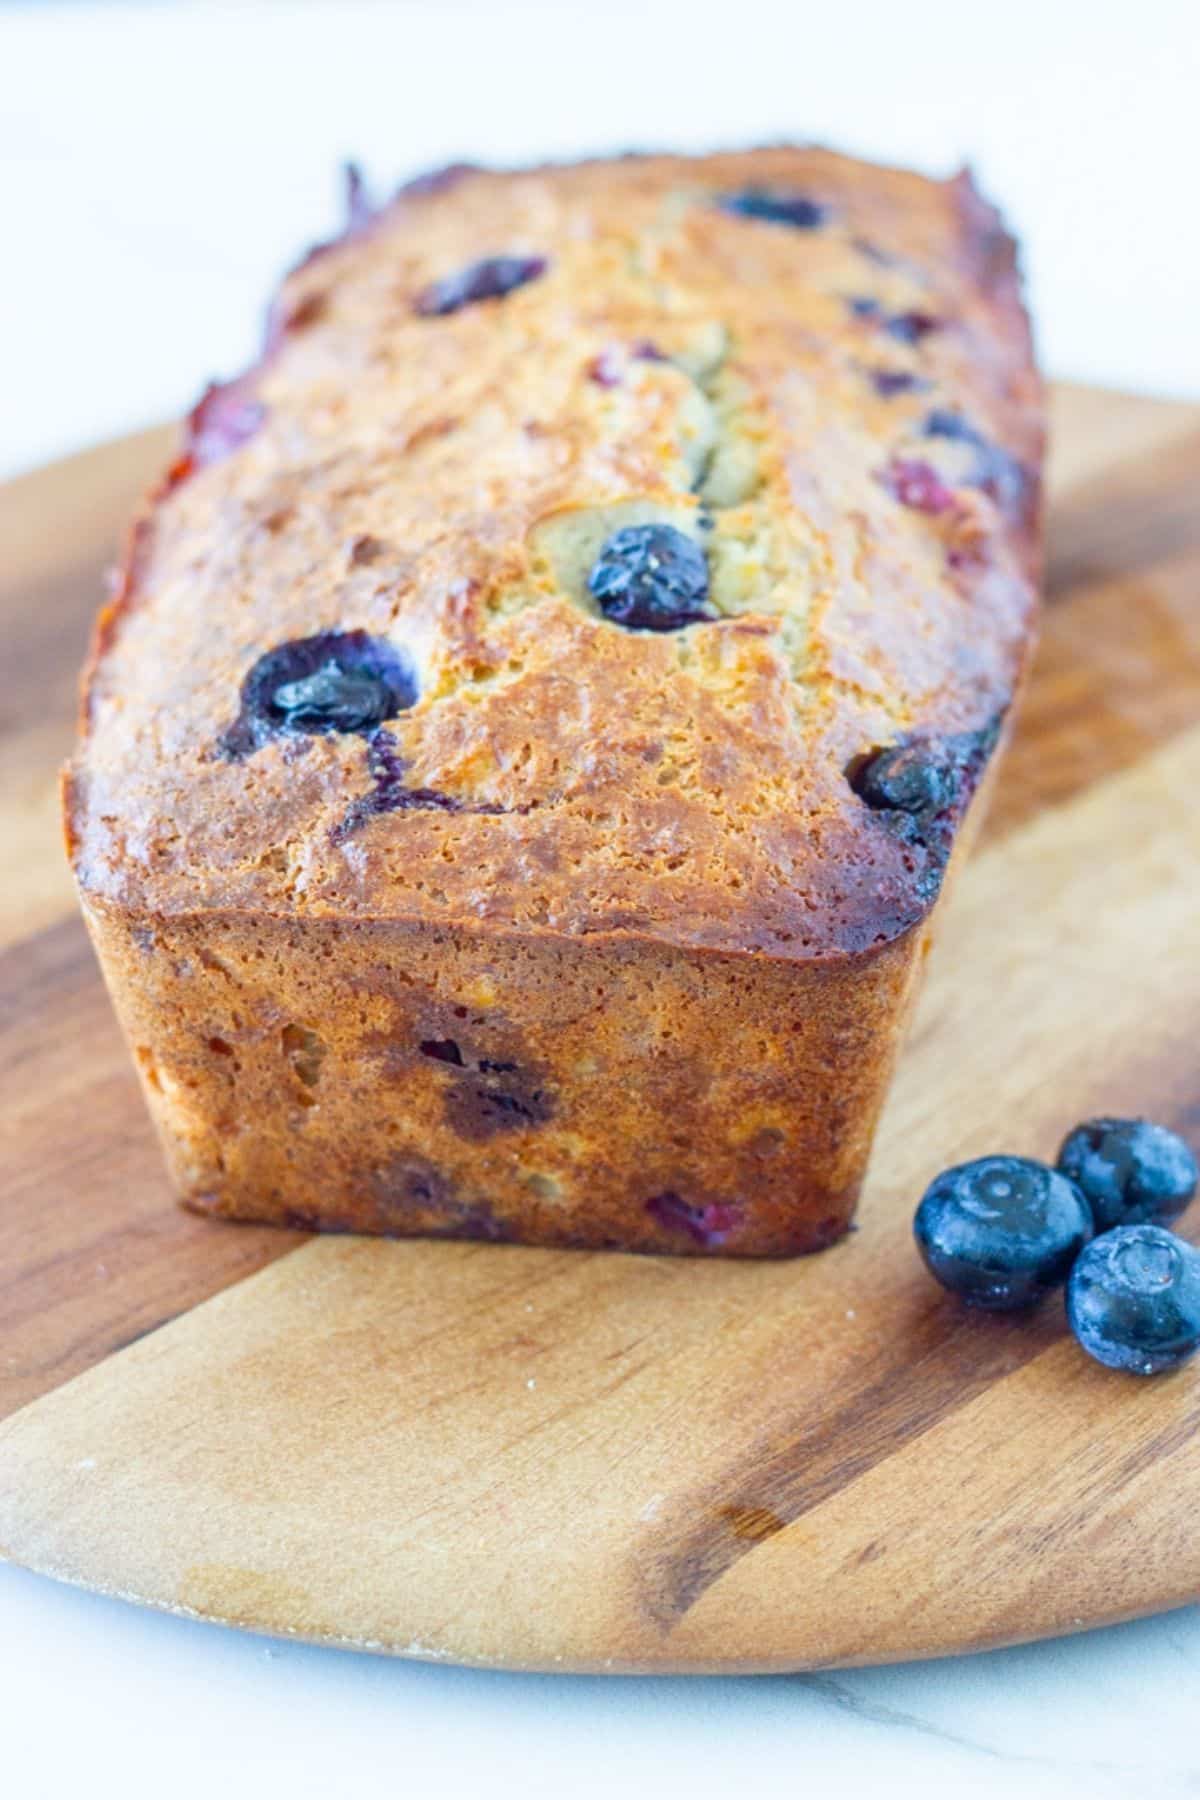 Freshly cooked healthy banana blueberry bread.